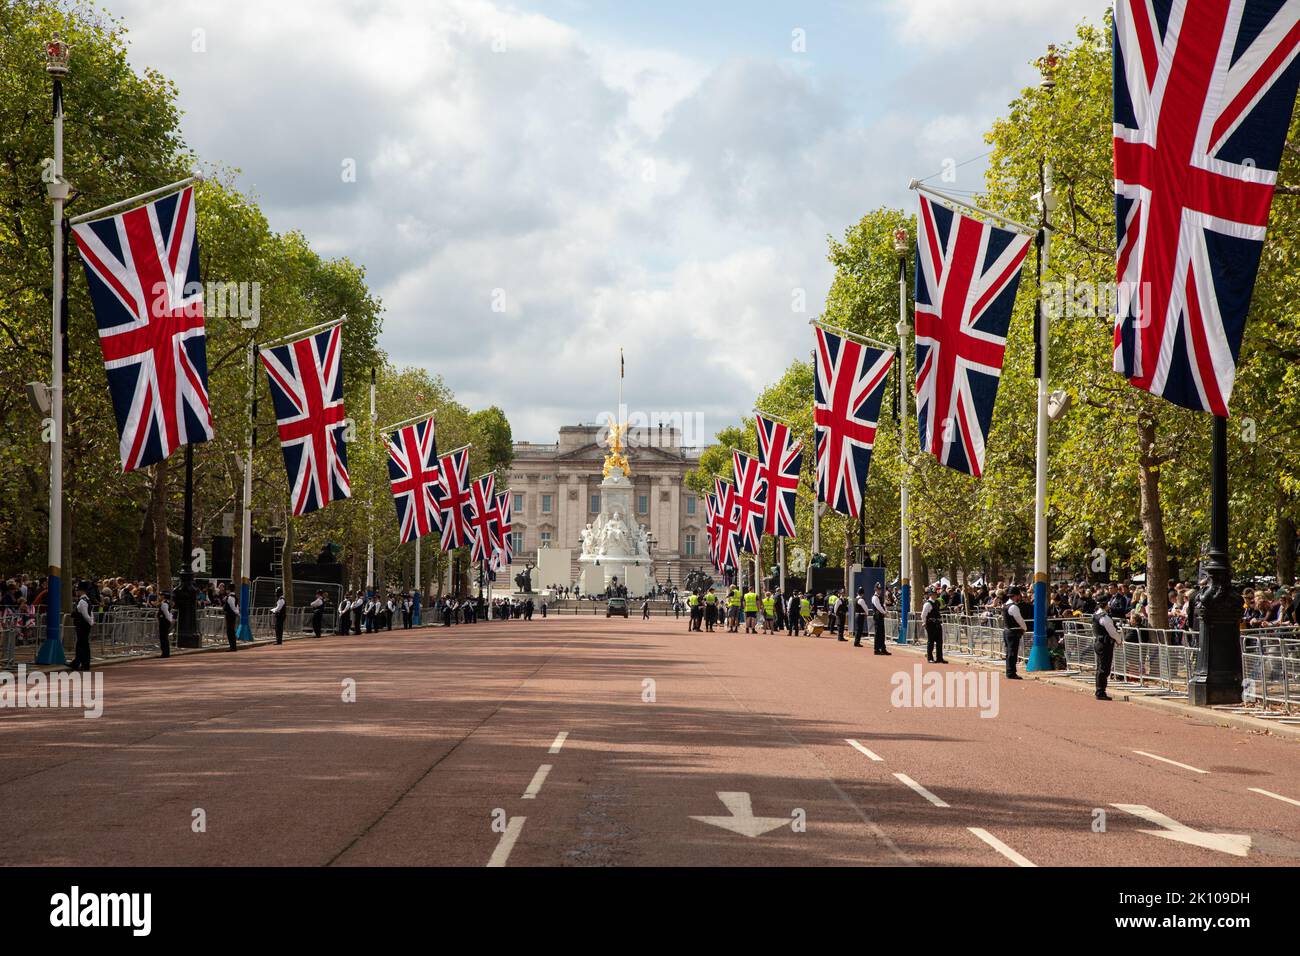 London, England. 14th September, 2022. The Mall is decorated with flags as mourners line the street to pay their respects to the Queen as she makes her final journey to Westminster Hall where she will be lying in state until the day of her funeral. Credit: Kiki Streitberger / Alamy Live News Stock Photo